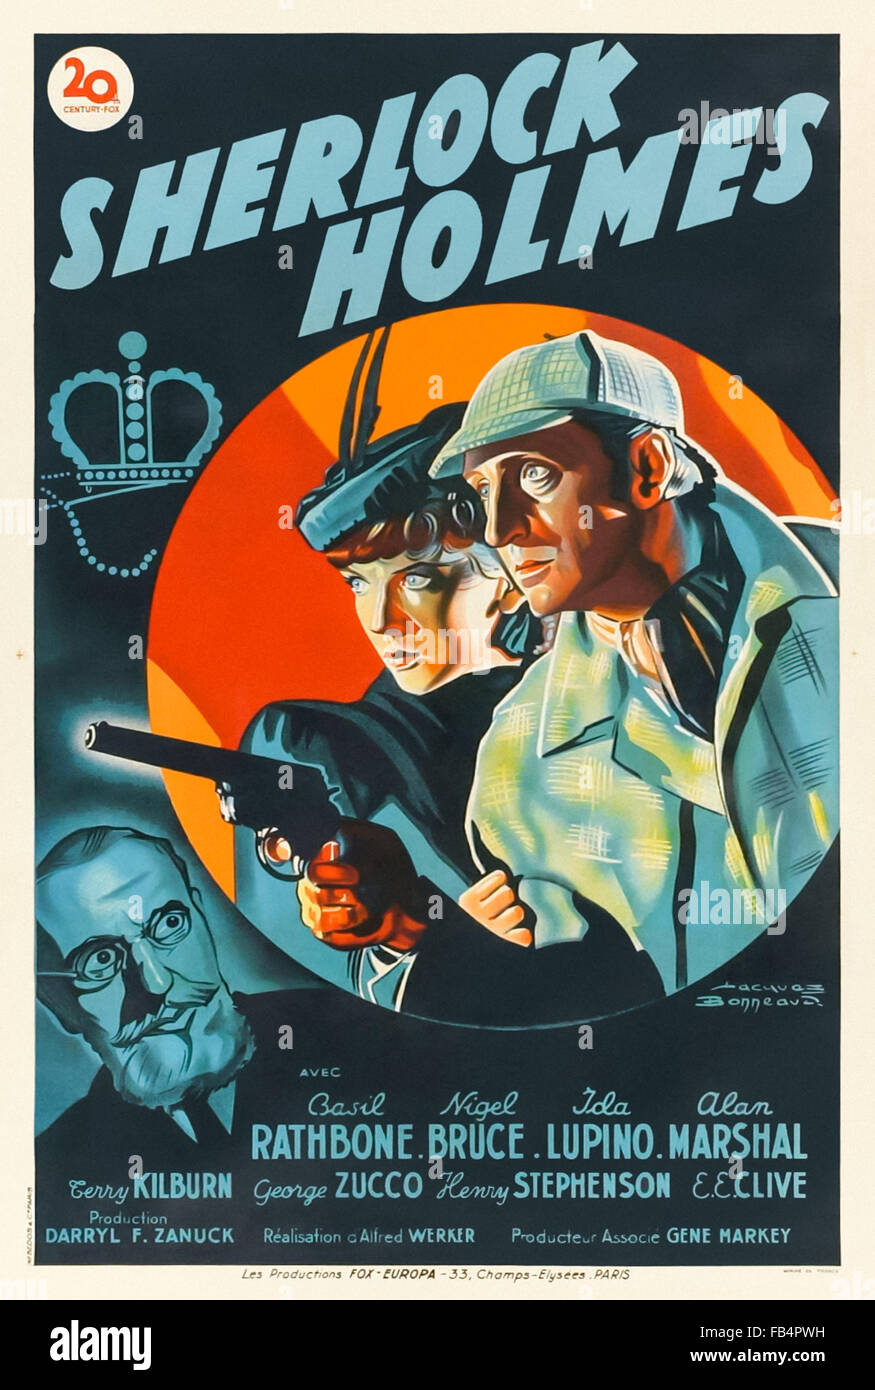 'The Adventures Of Sherlock Holmes' (1939) French film poster. Professor Moriarity plans to steal the crown jewels. Directed by Alfred Werker and starring Basil Rathbone, Nigel Bruce and Ida Lupino. See description for more information Stock Photo